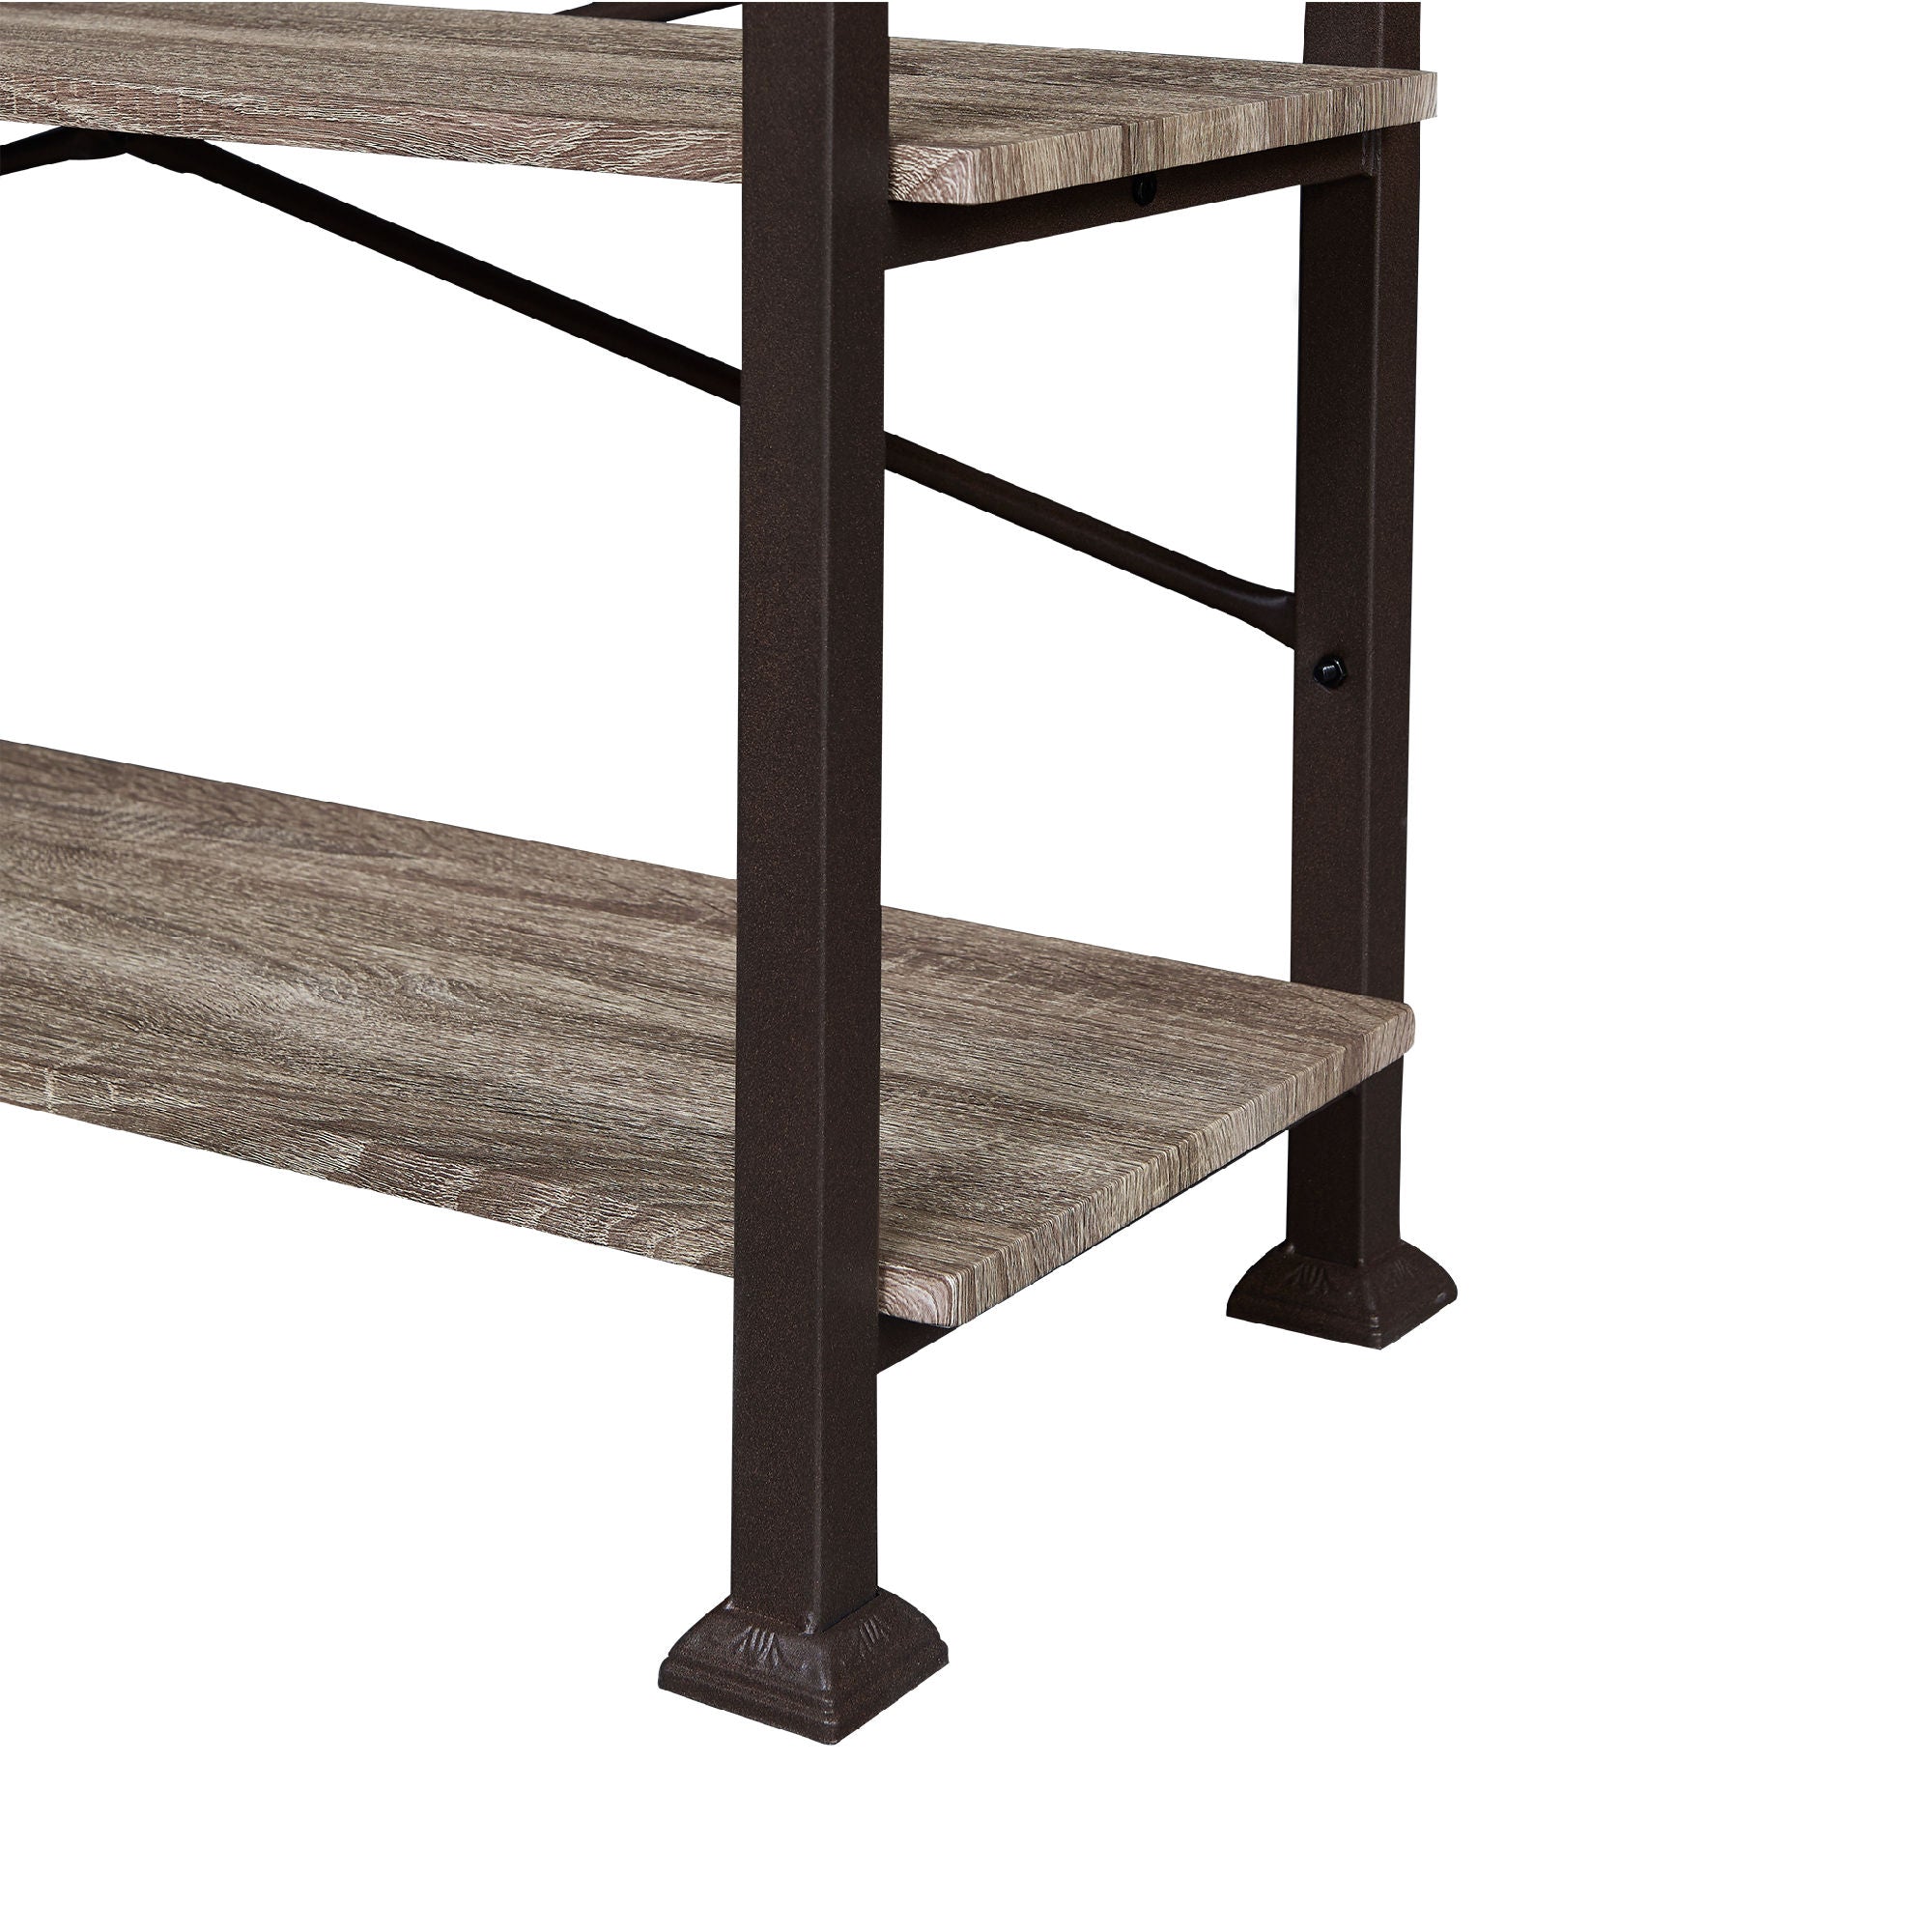 Free shipping 3 Tier Console Sofa Table, Industrial Rustic Entryway Table with Storage Shelf for Living Room, Hallway, Grey Oak Finish, 47-Inch Long  YJ